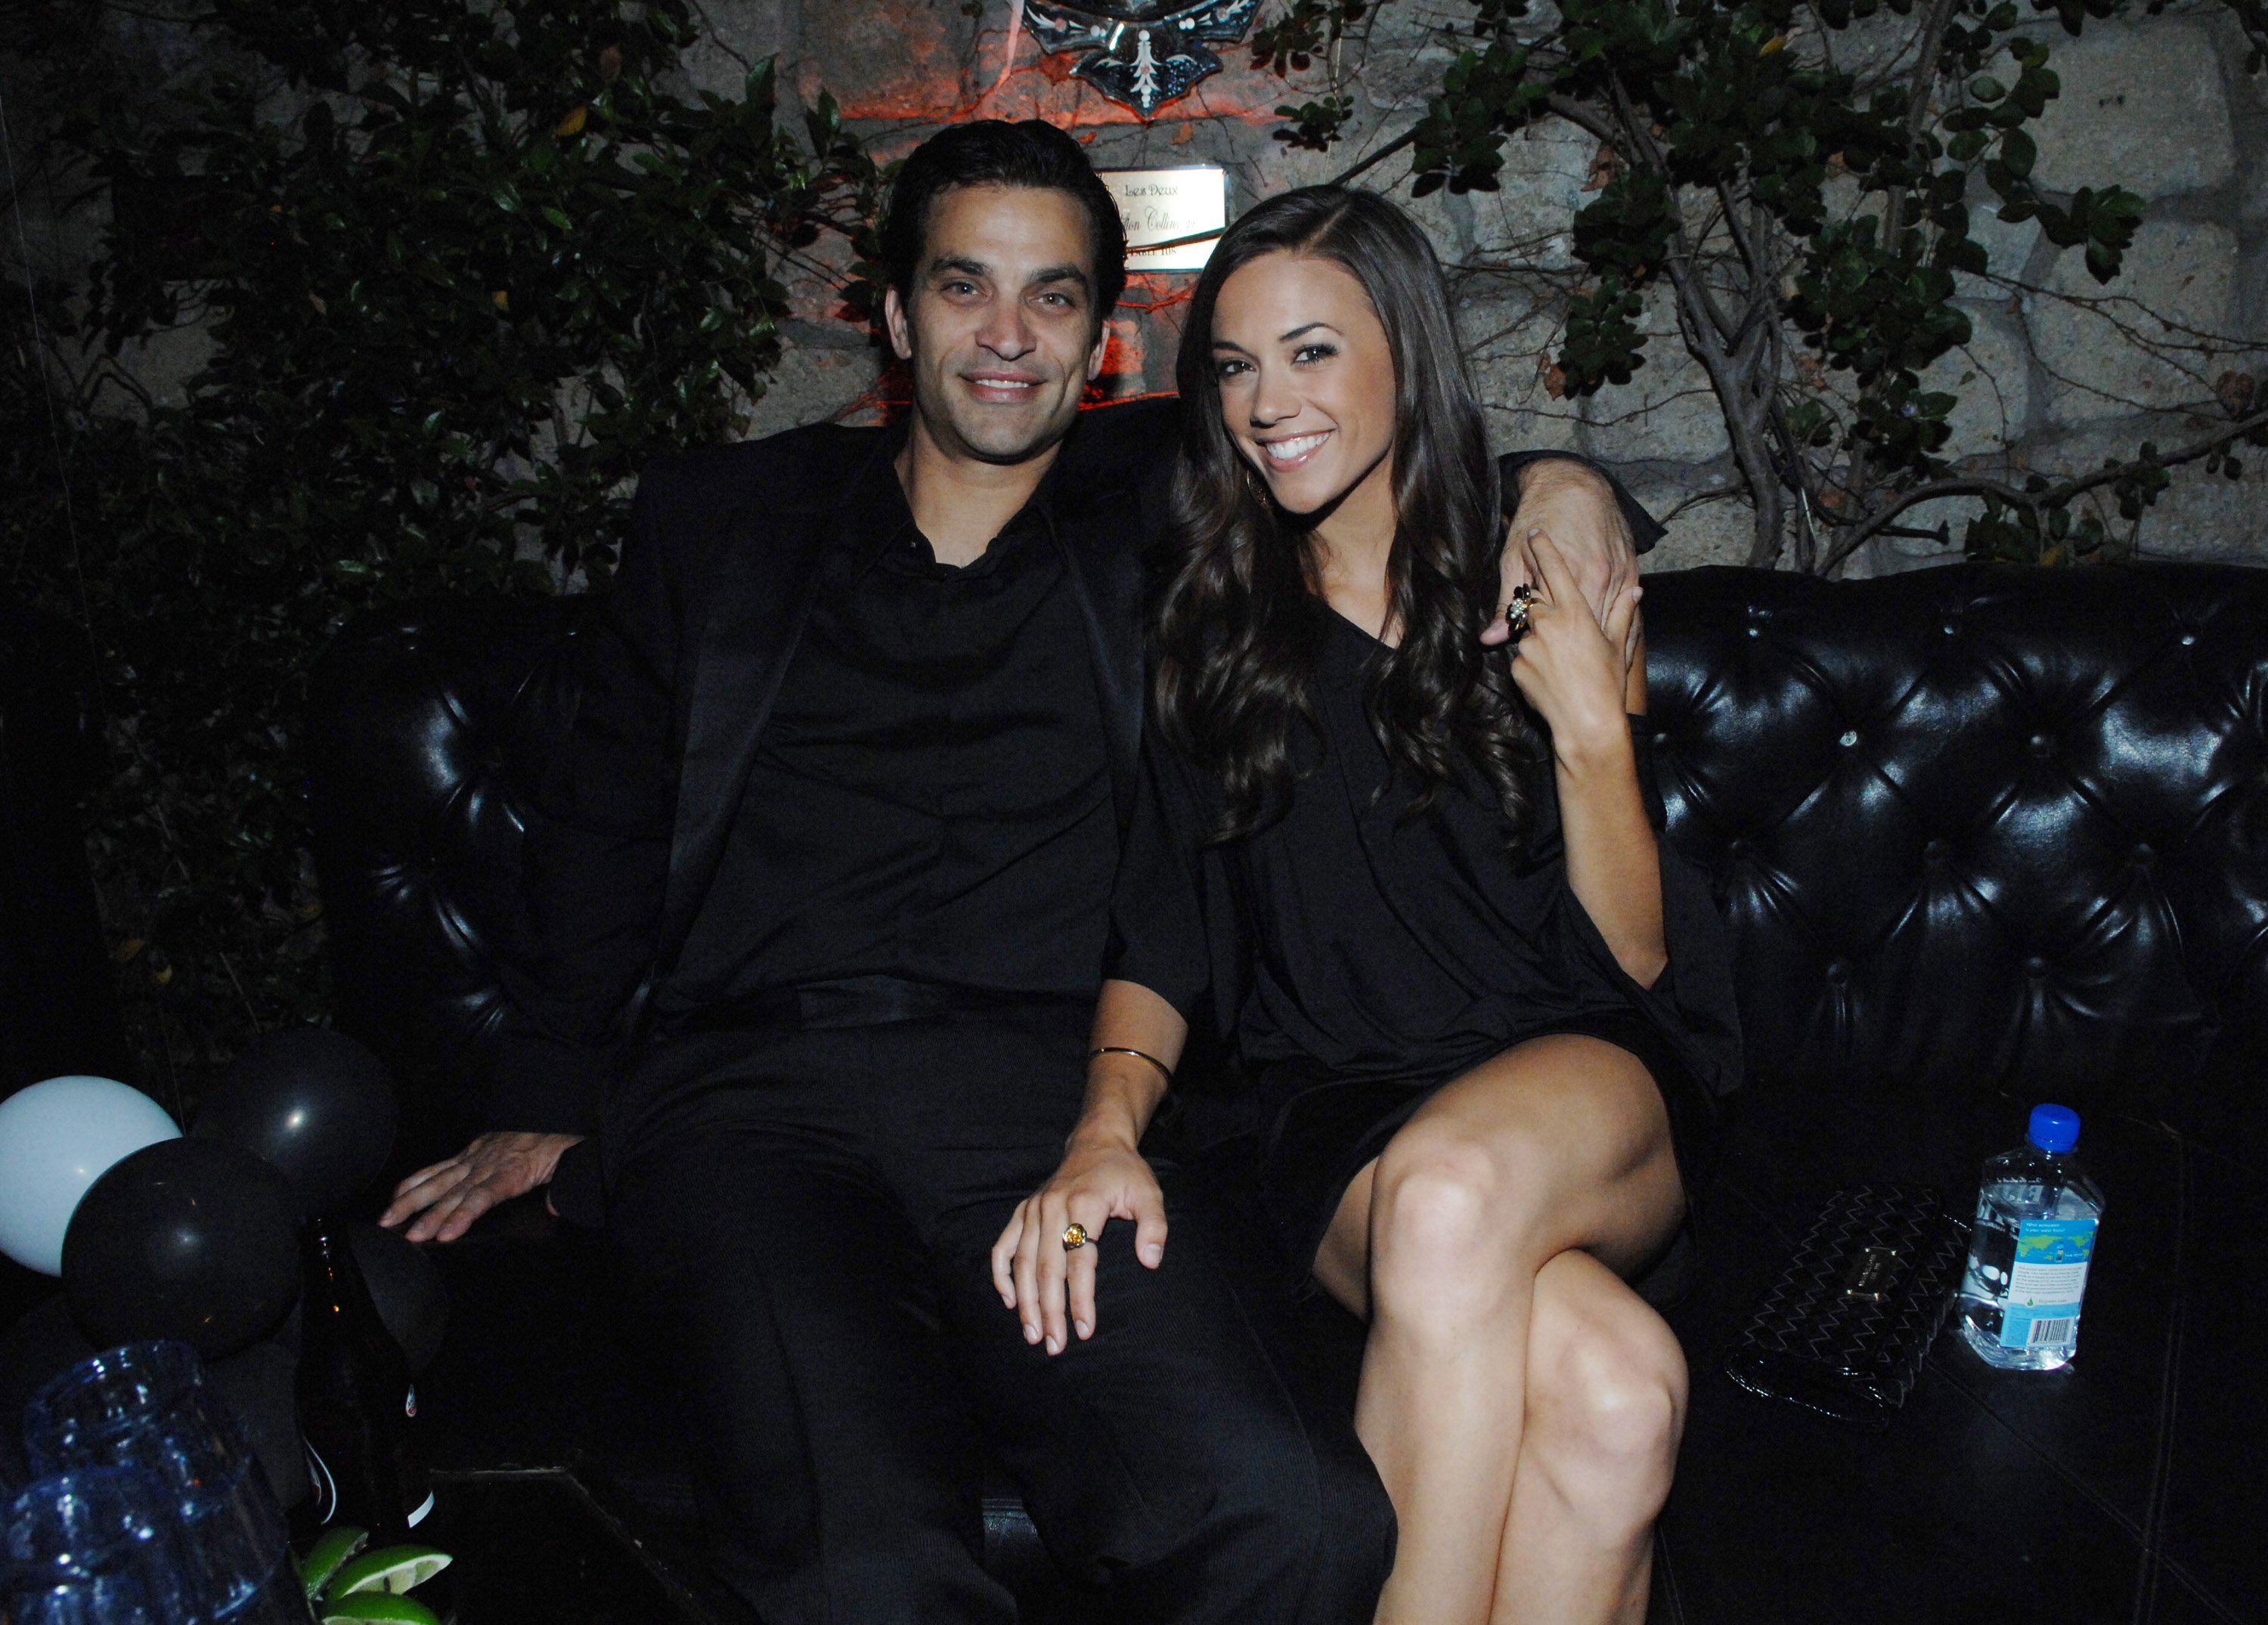 Actors Johnathan Schaech and Jana Kramer at Sylvain Bitton and JT Torregiani's birthday celebration at Les Deux on April 21, 2009 in Hollywood, California. | Source: Getty Image